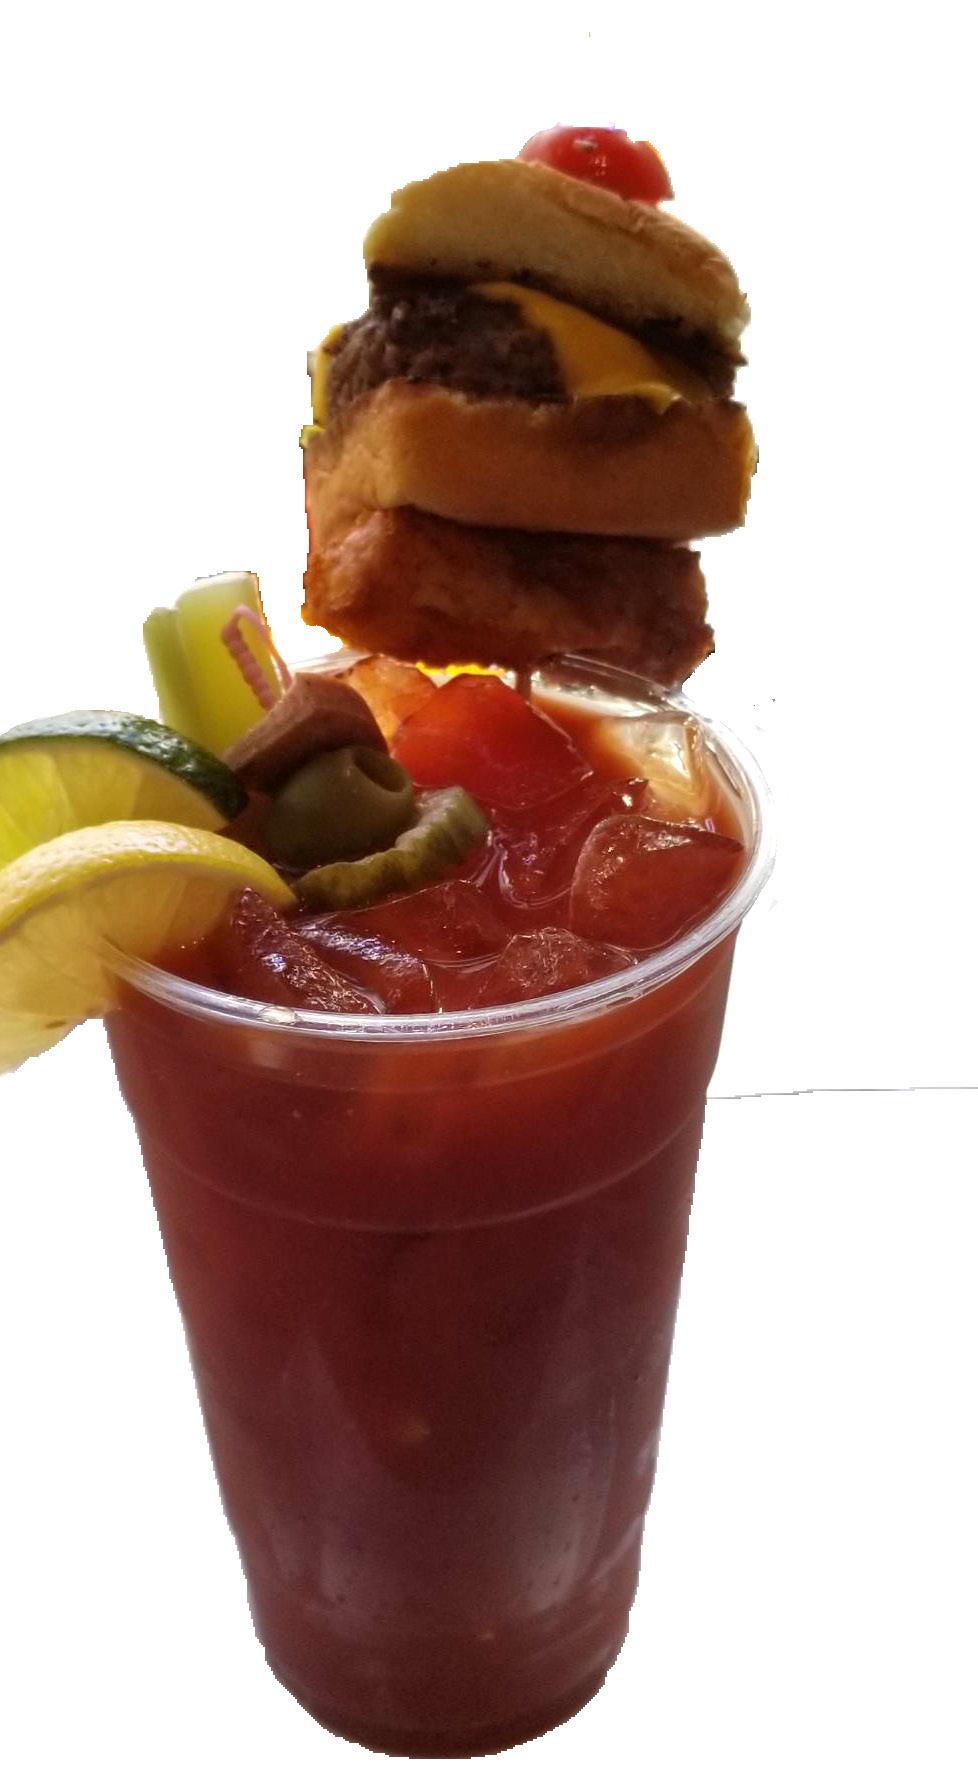 Pepper Vodka, Remedy Bloody Mary Mix, beef stick, cheese,